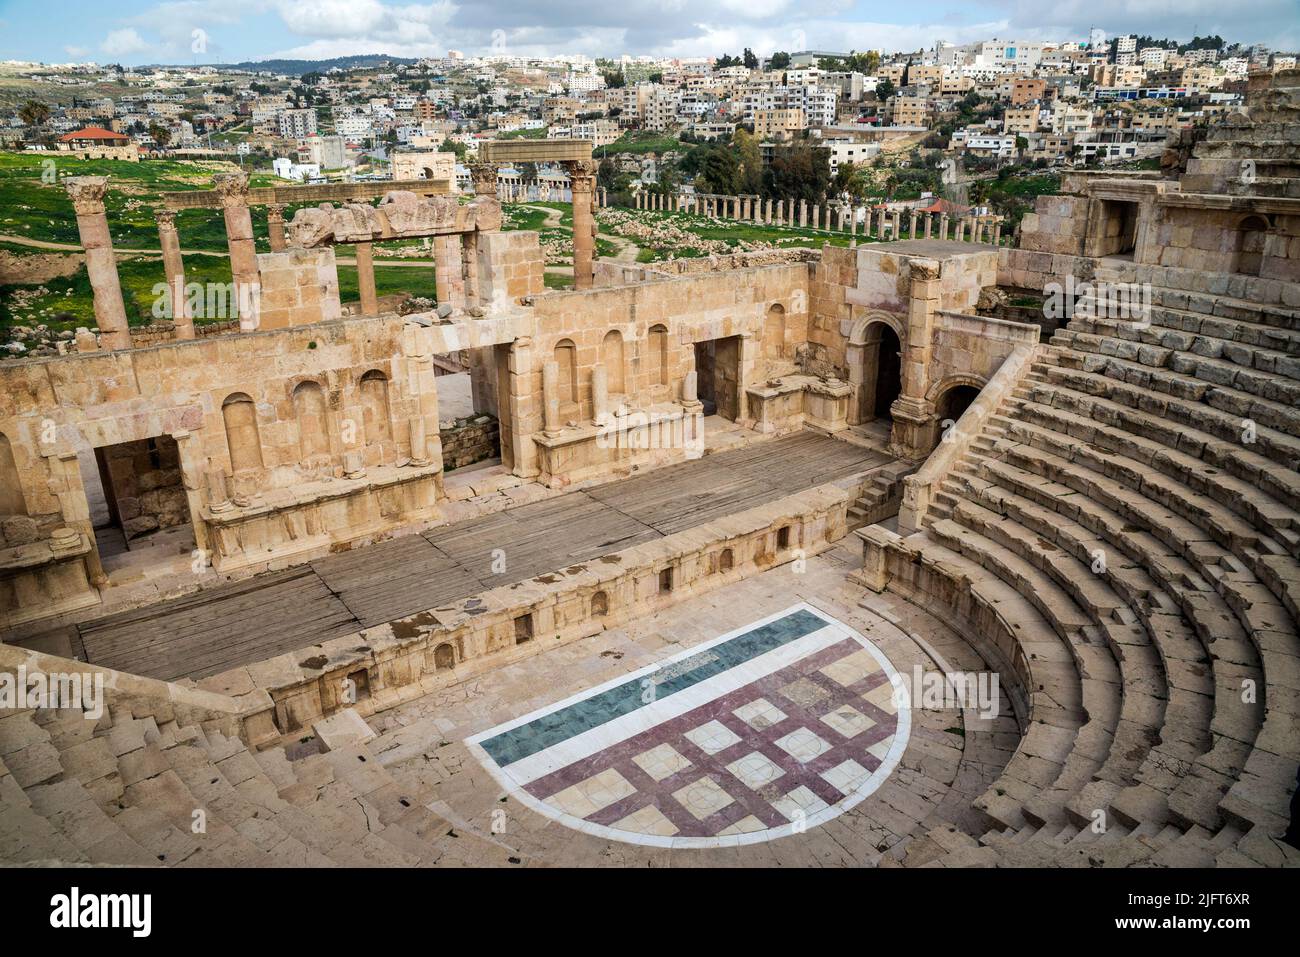 The roman theatre in the ancient city of Jerash, Gerasa Governorate, Jordan Stock Photo